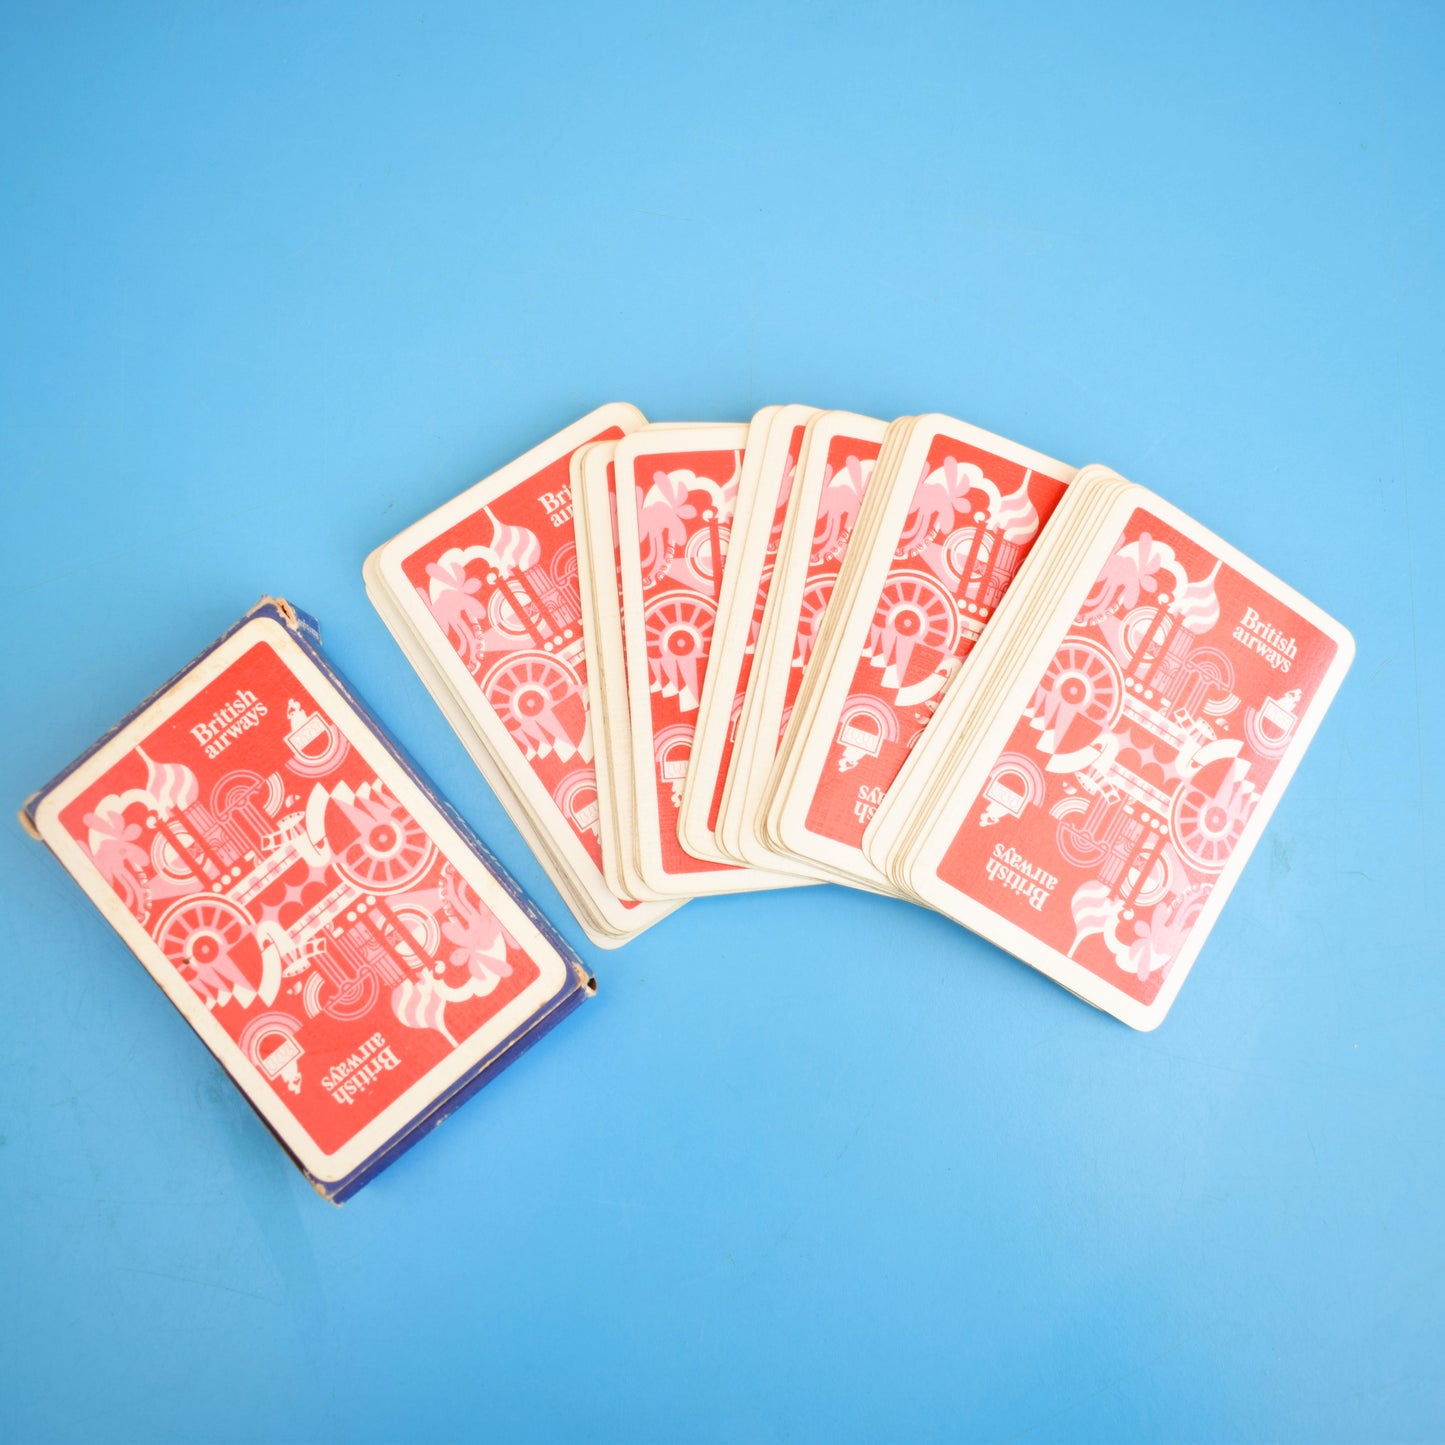 Vintage 1960s BA Playing Card Sets